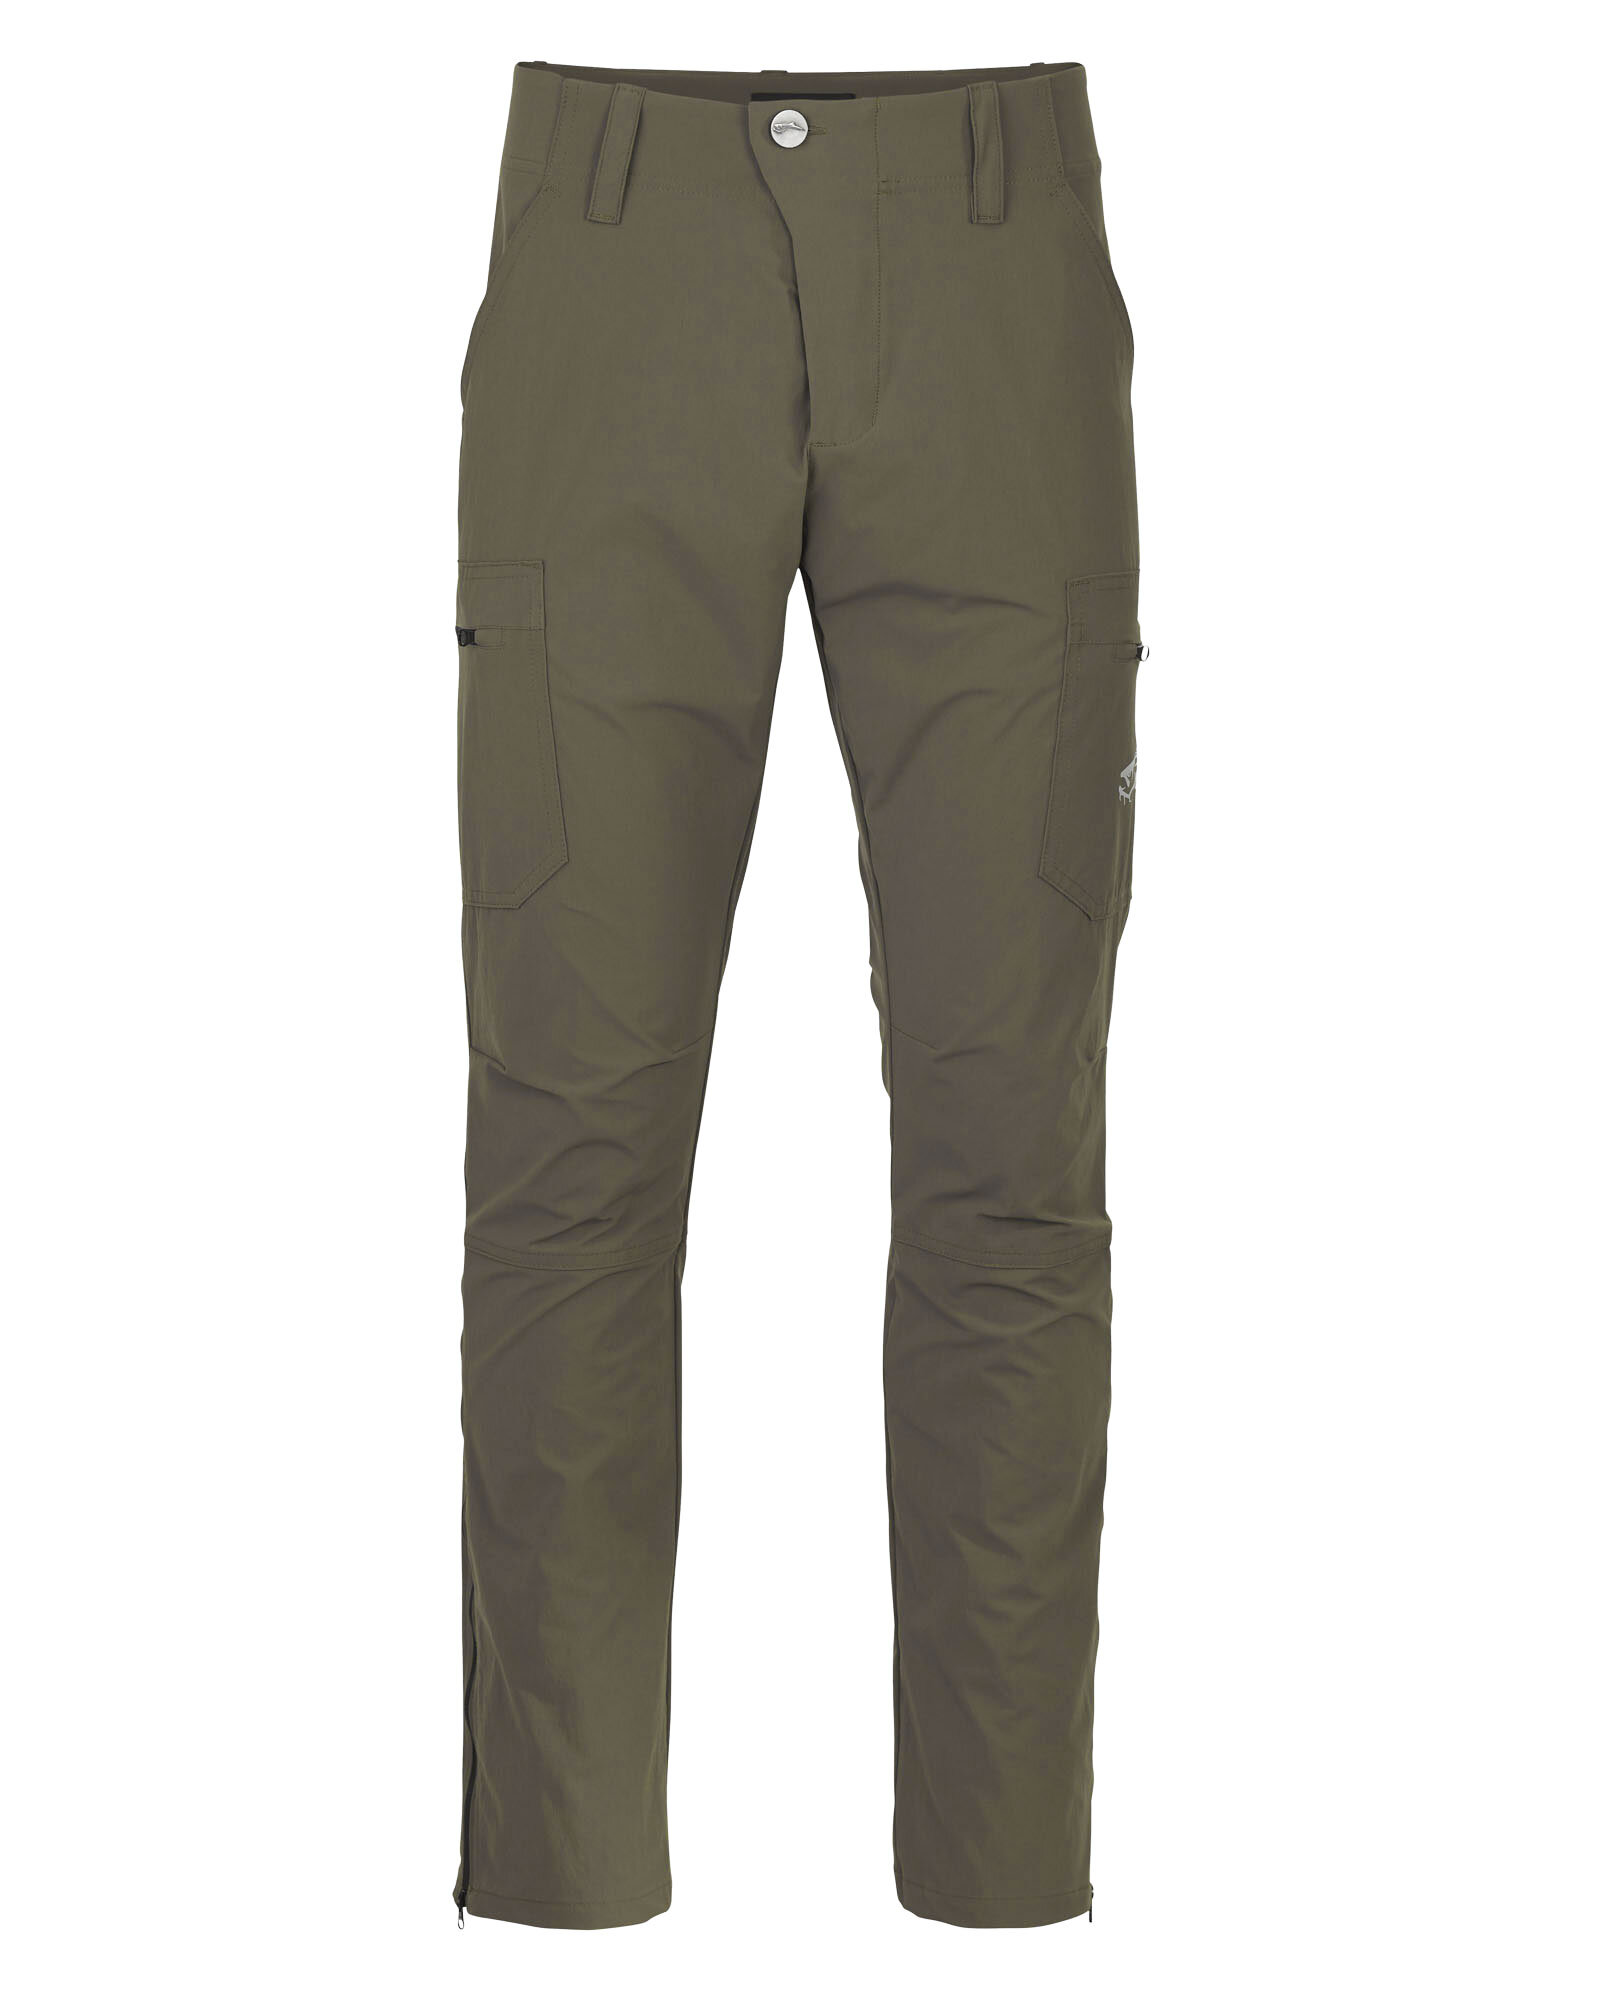 https://bowandrod.com/wp-content/uploads/2019/08/olive-pant-front-view.jpg